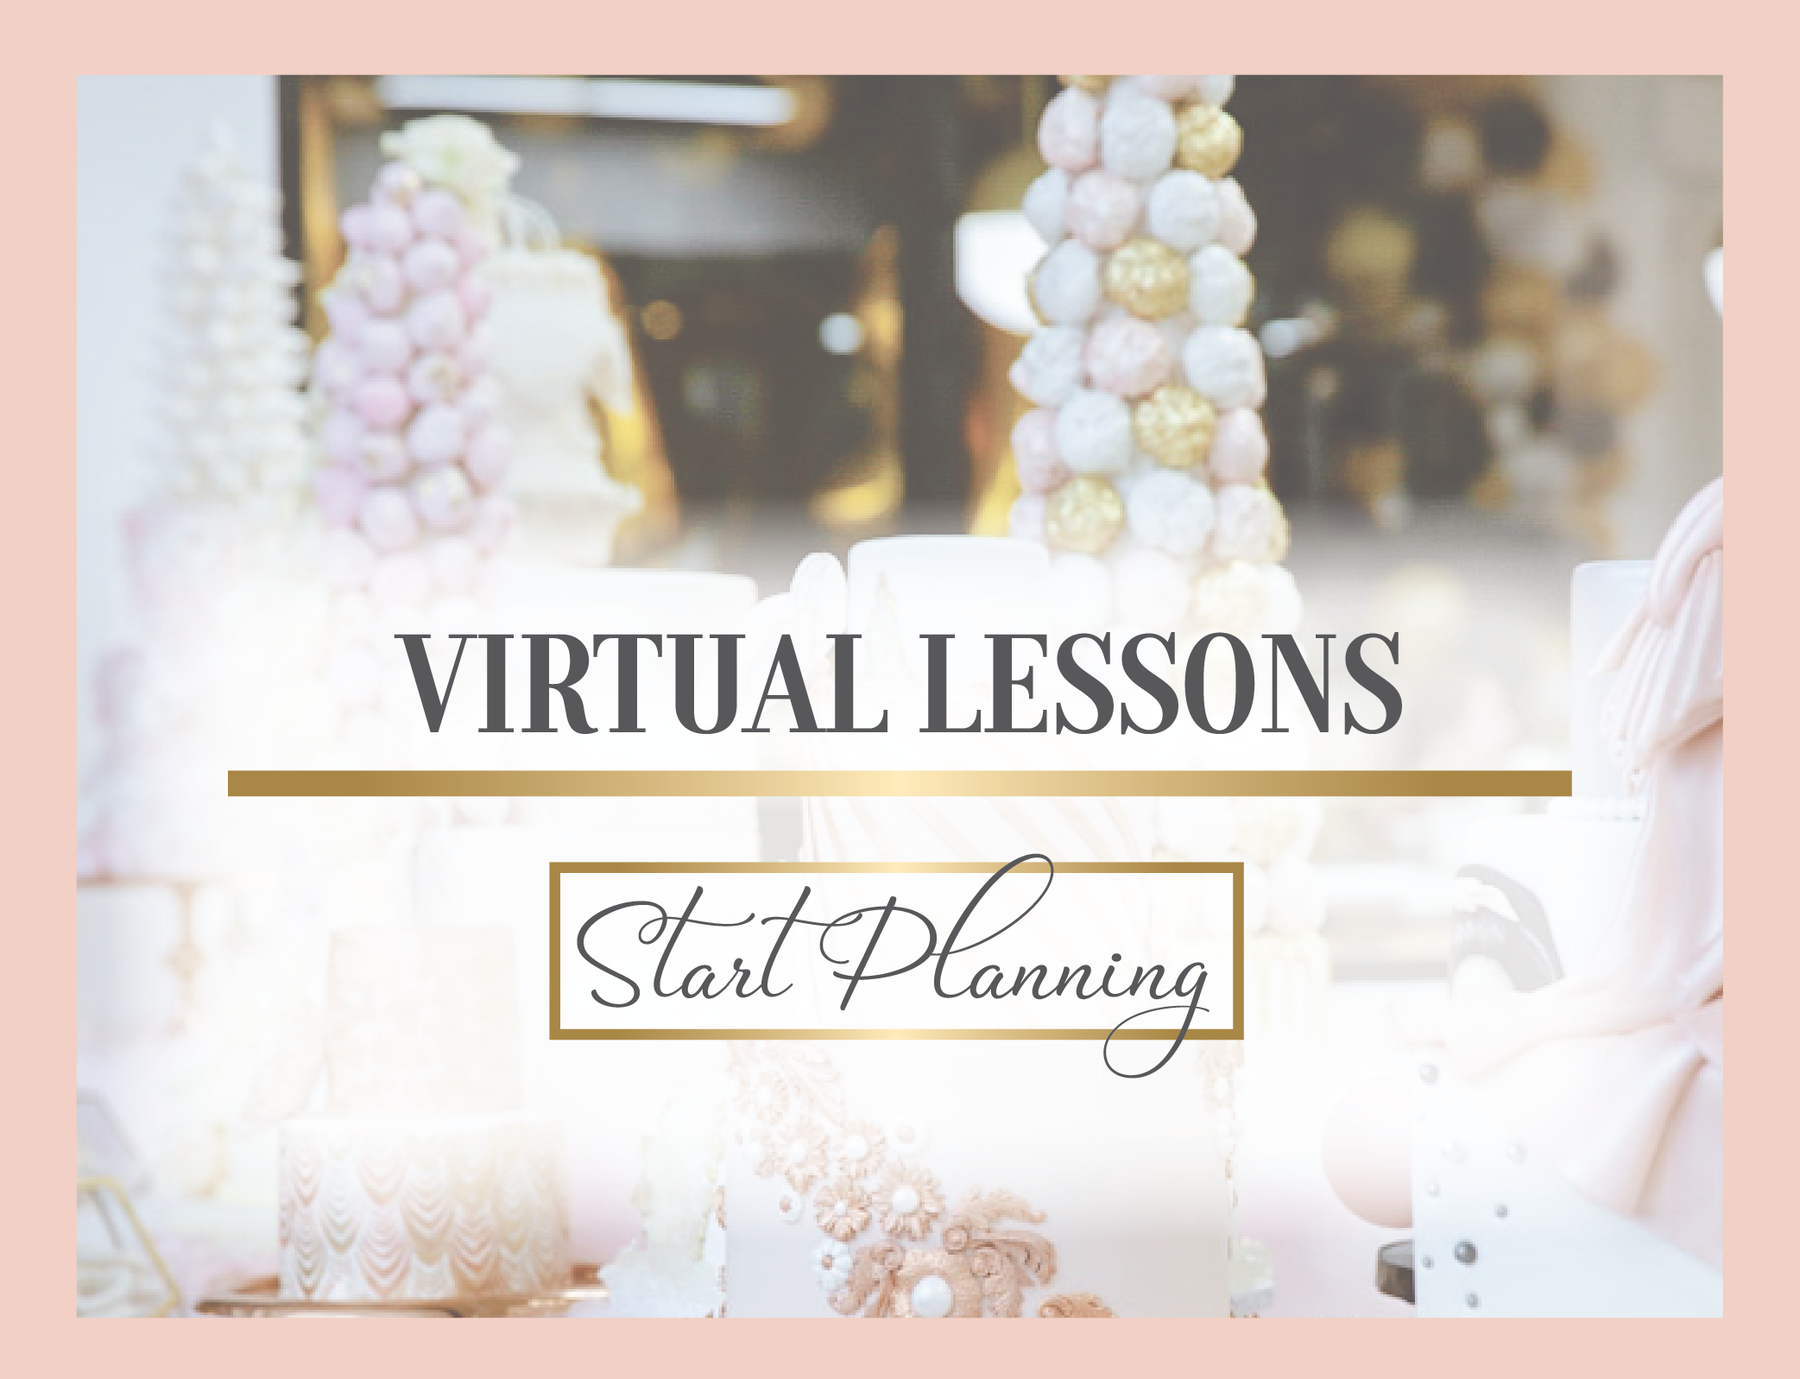 NY Cake Academy | Virtual Online Lessons For Cake Decorating